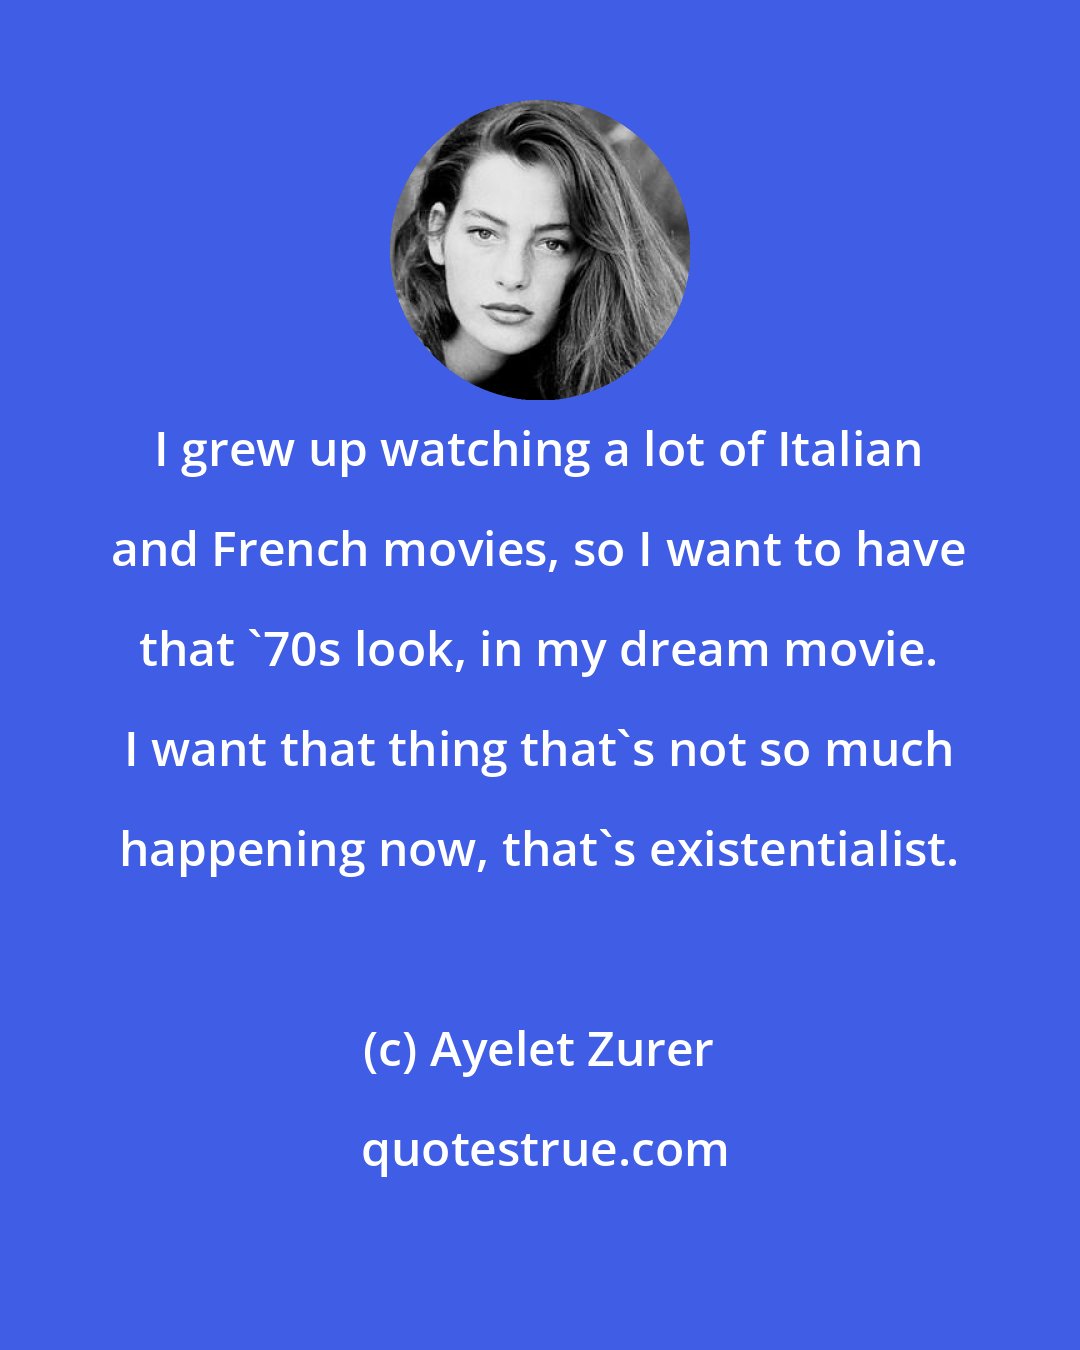 Ayelet Zurer: I grew up watching a lot of Italian and French movies, so I want to have that '70s look, in my dream movie. I want that thing that's not so much happening now, that's existentialist.